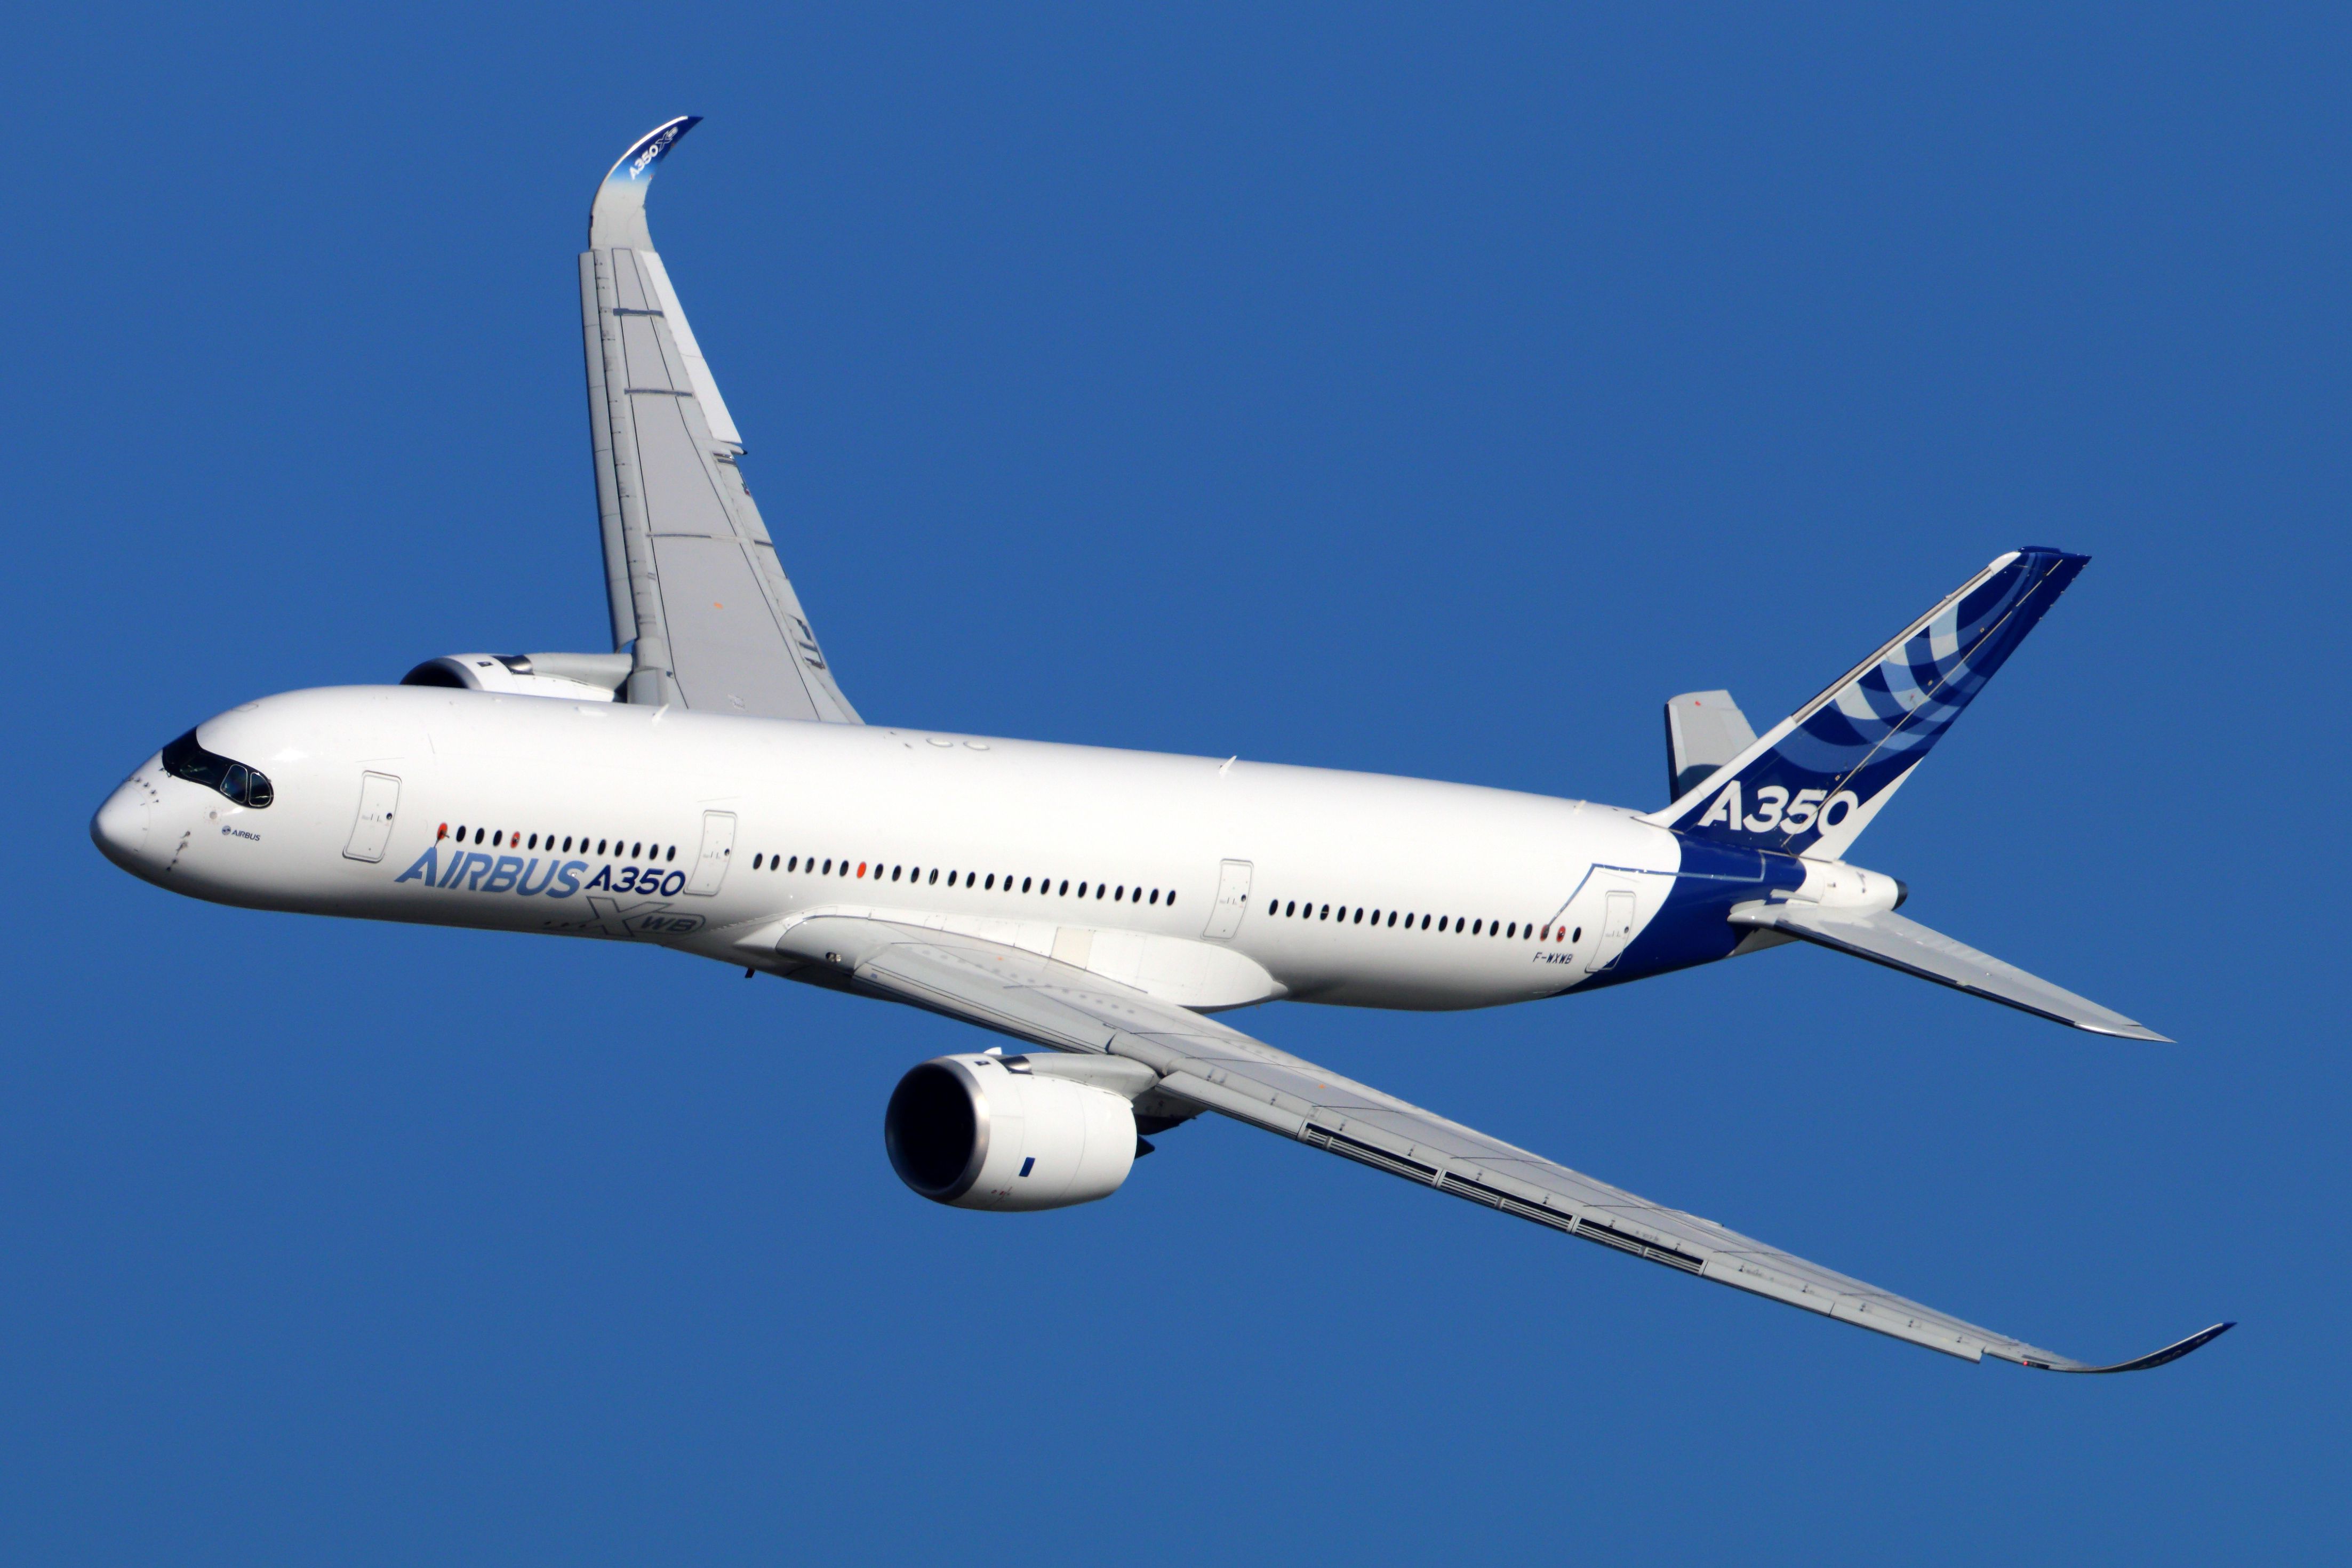 The A300 Vs The A350: How Do The Airbus Widebodies Compare?